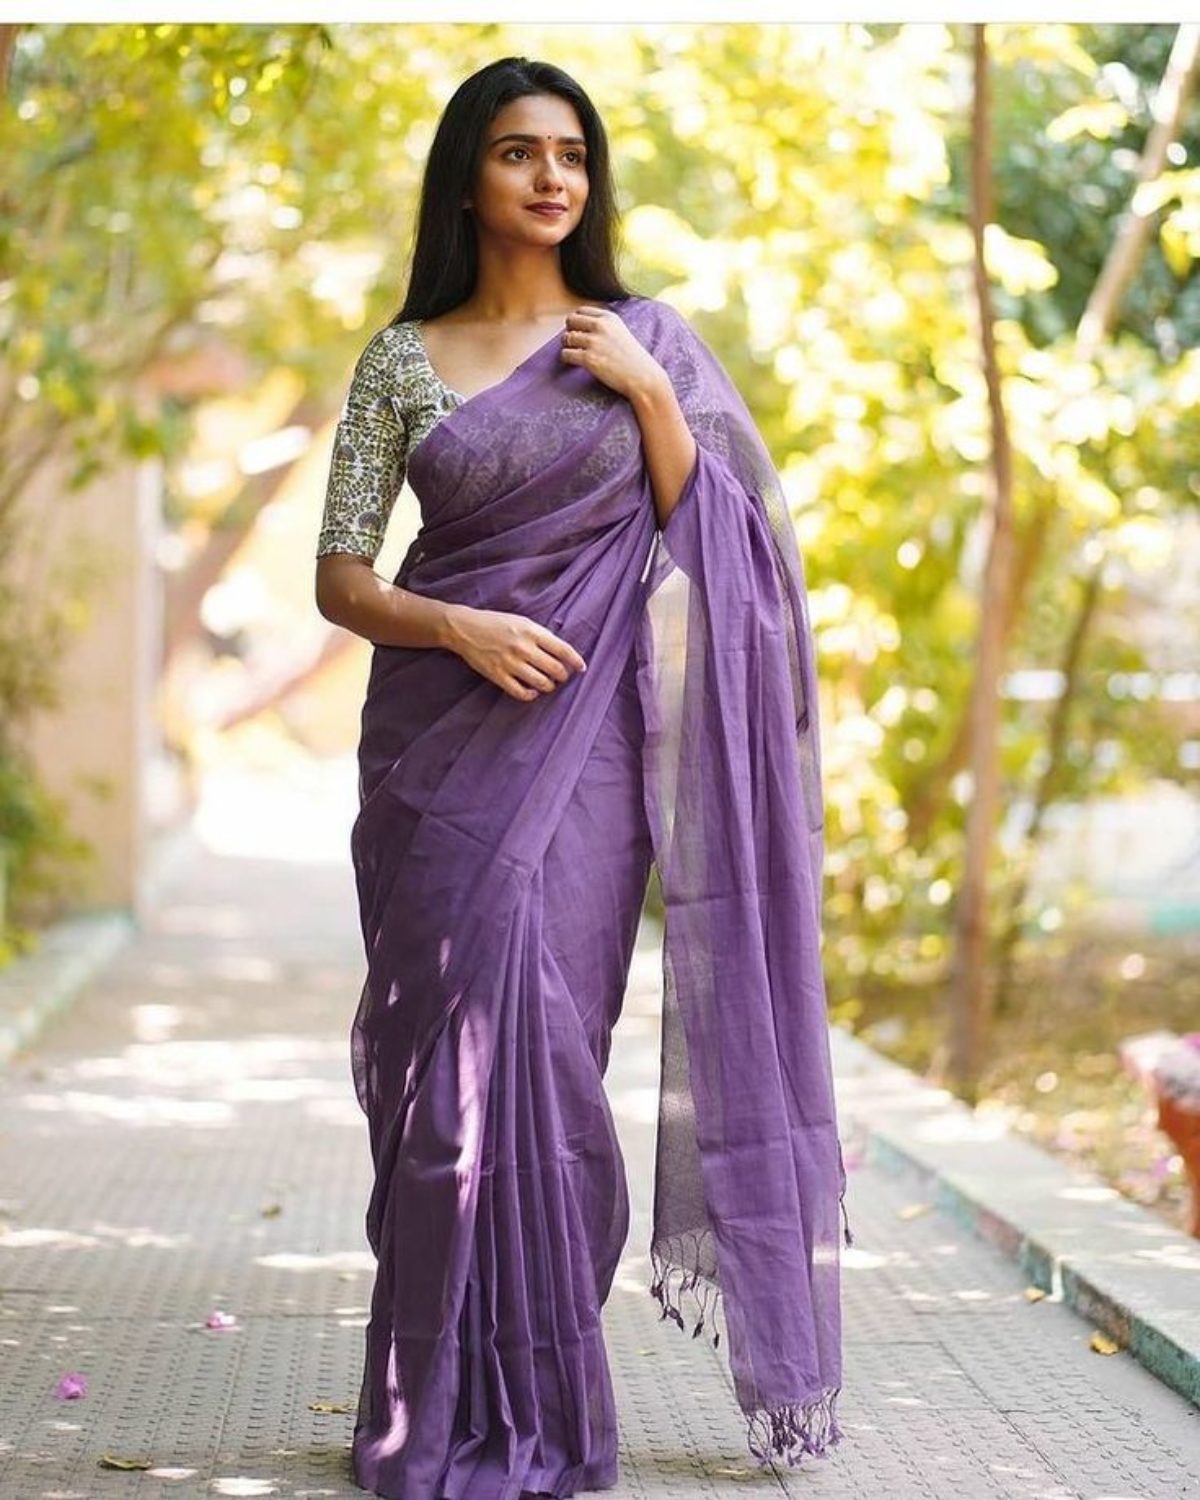 SIMPLE SAREE LOOK FOR PARTY: FOR OFFICE TO PARTY